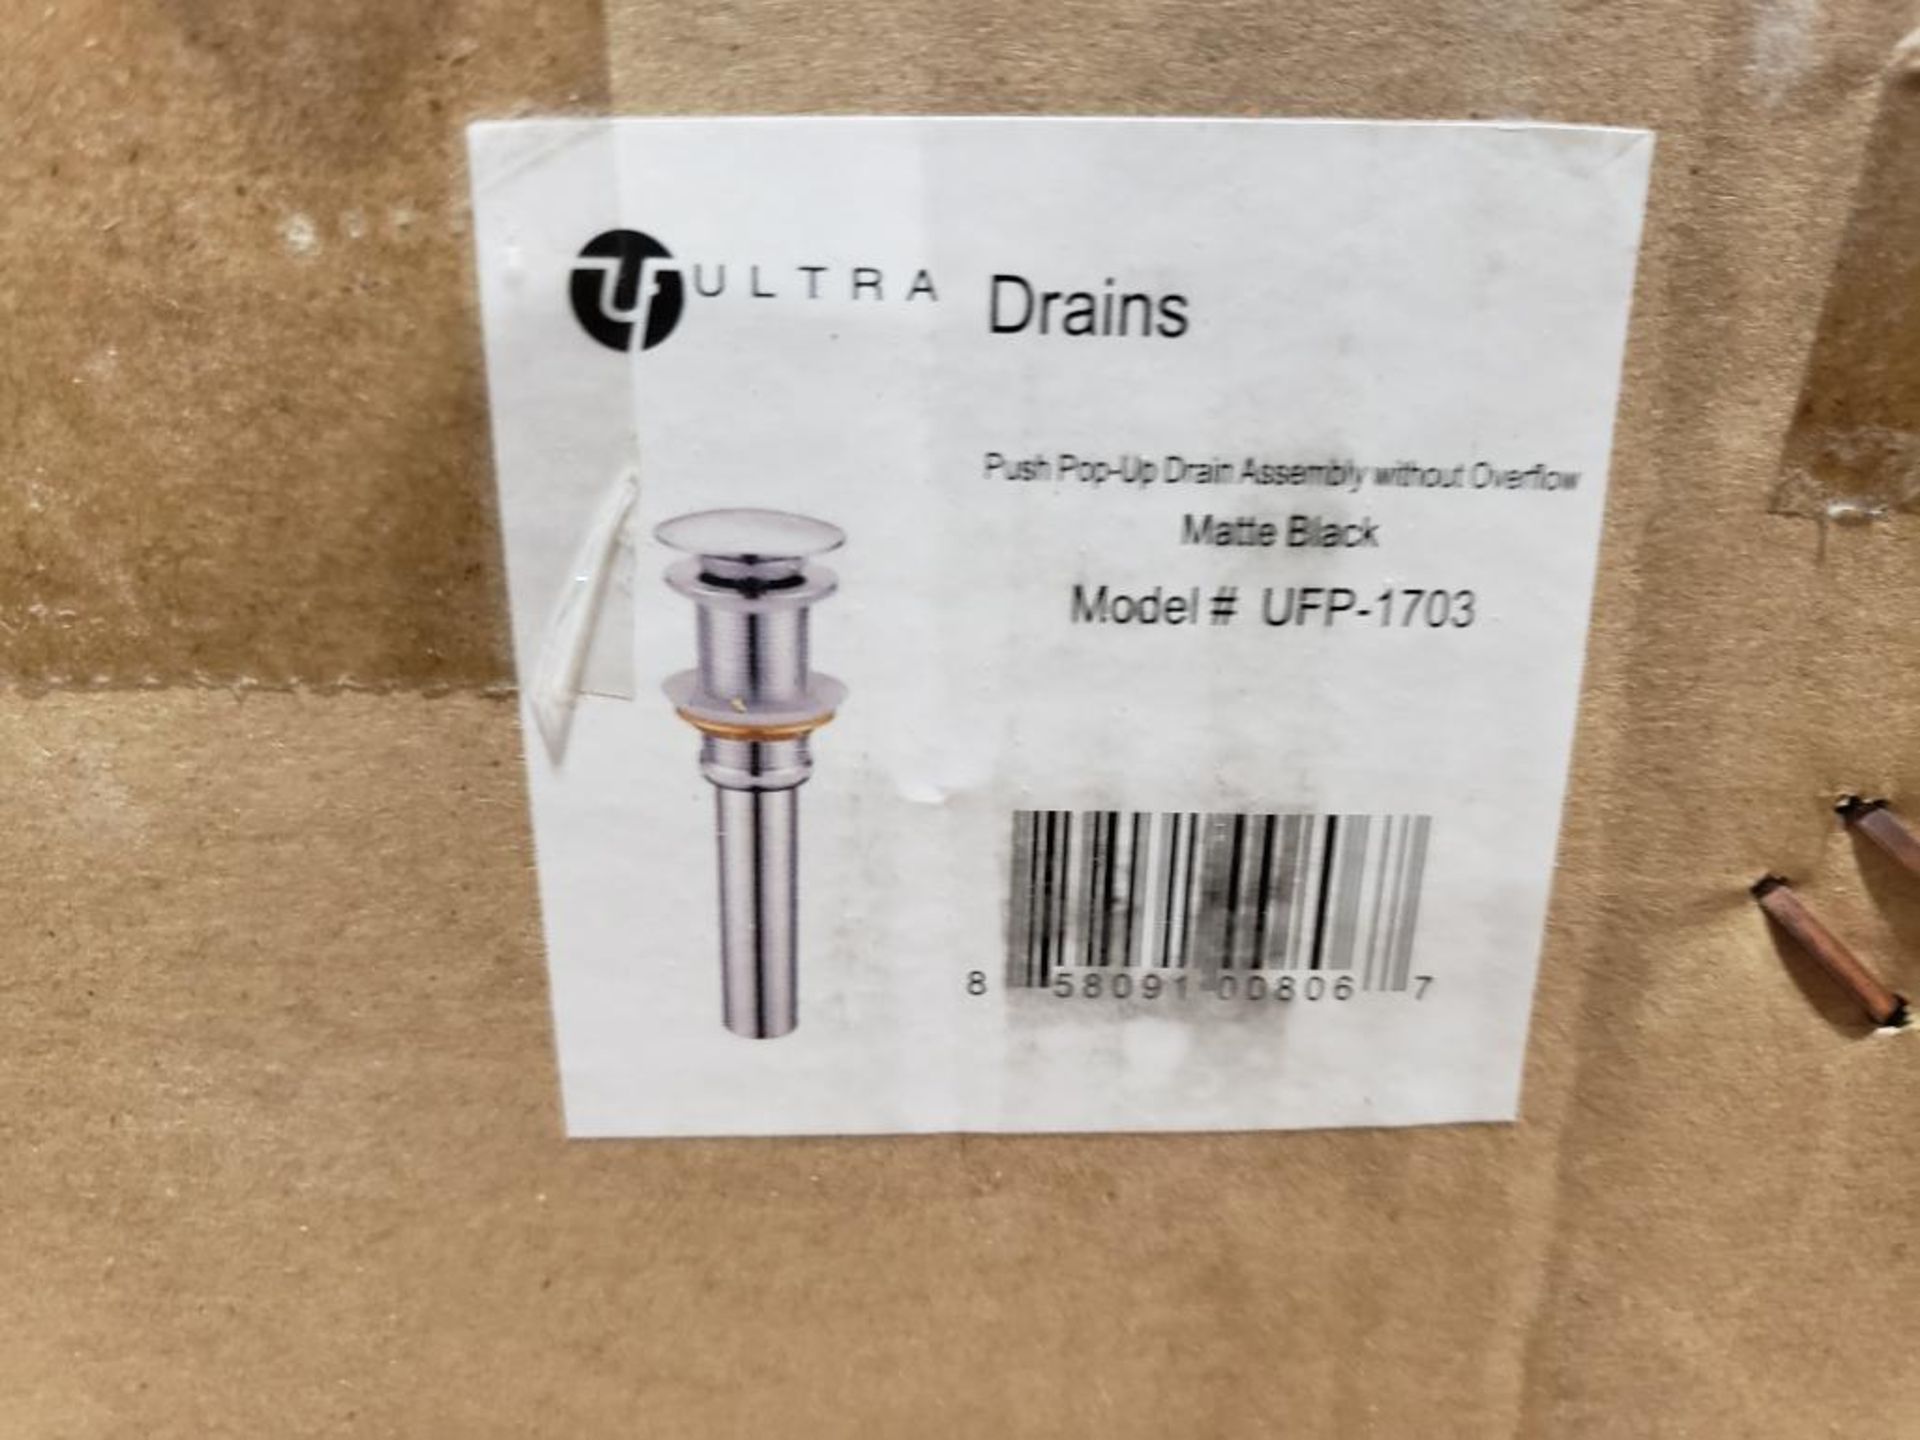 Qty 25 - Ultra drains. push pop drain assembly with overflow. Model UFP-1703, matte black. - Image 2 of 3